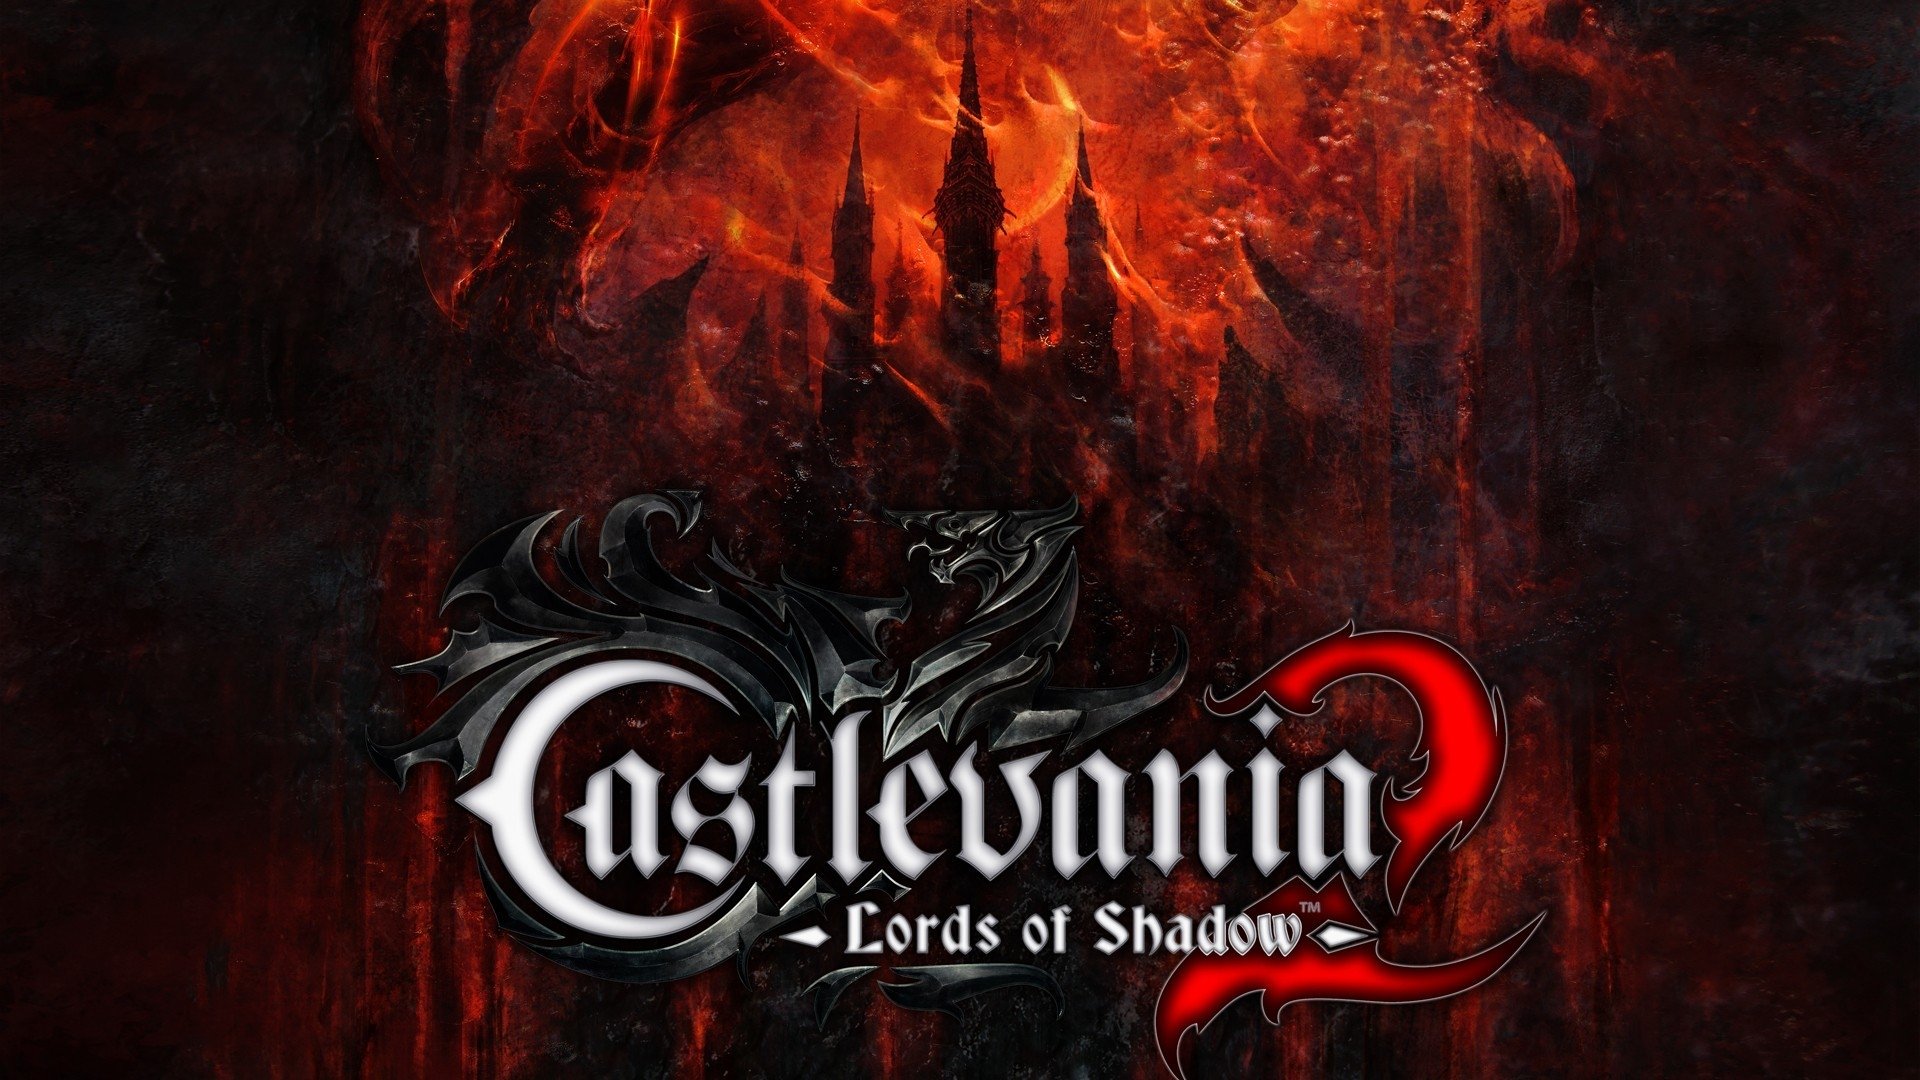 General 1920x1080 Castlevania Castlevania: Lords of Shadow 2 video games video game art